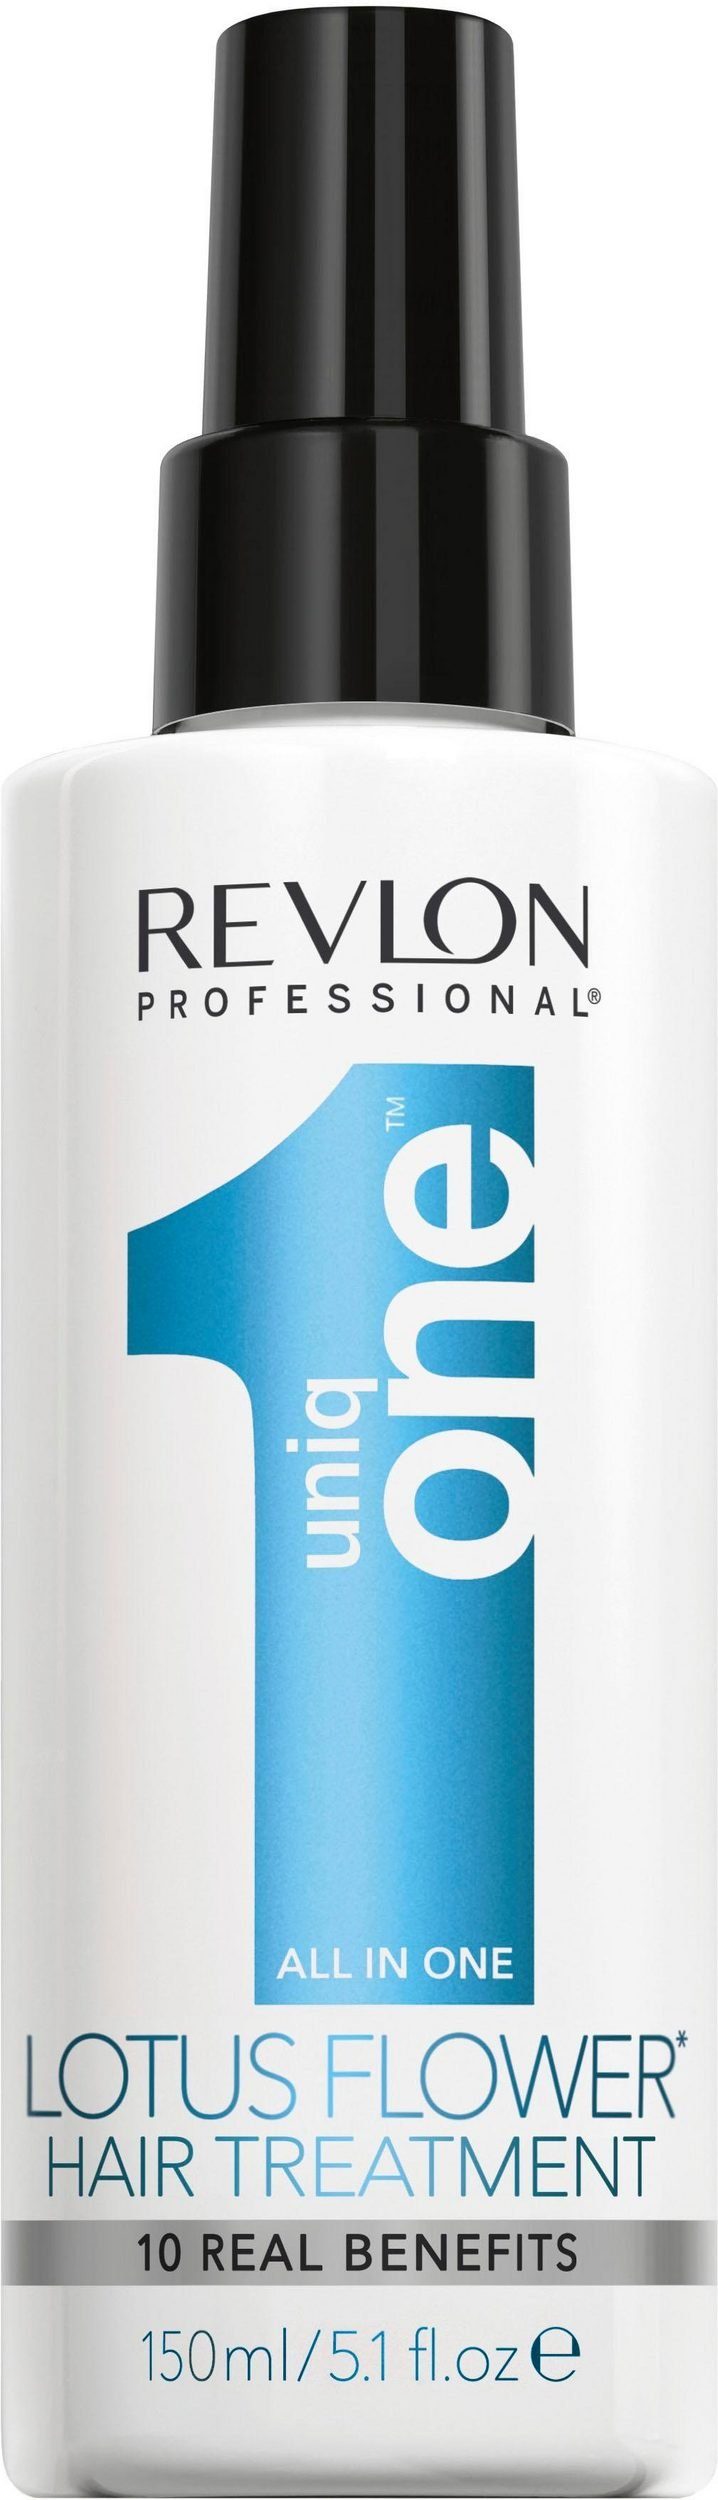 REVLON PROFESSIONAL Leave-in Pflege Uniq Hair Flower in one All Treatment Lotus One